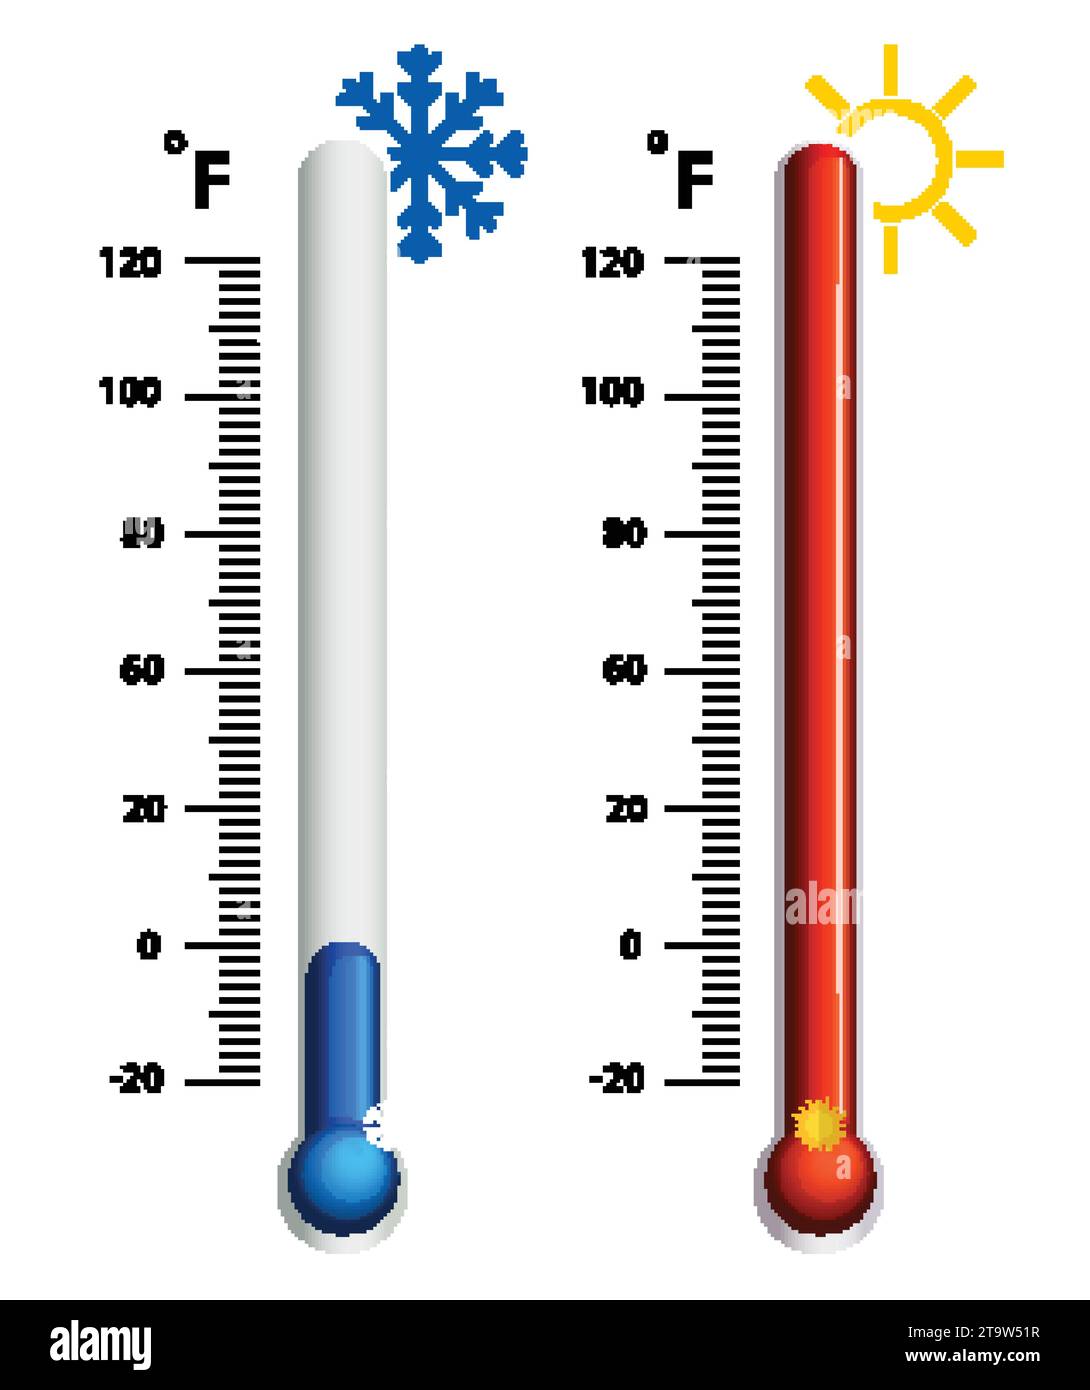 https://c8.alamy.com/comp/2T9W51R/hot-and-cold-meteorology-thermometers-on-transparent-background-blue-and-red-thermometers-vector-illustration-2T9W51R.jpg